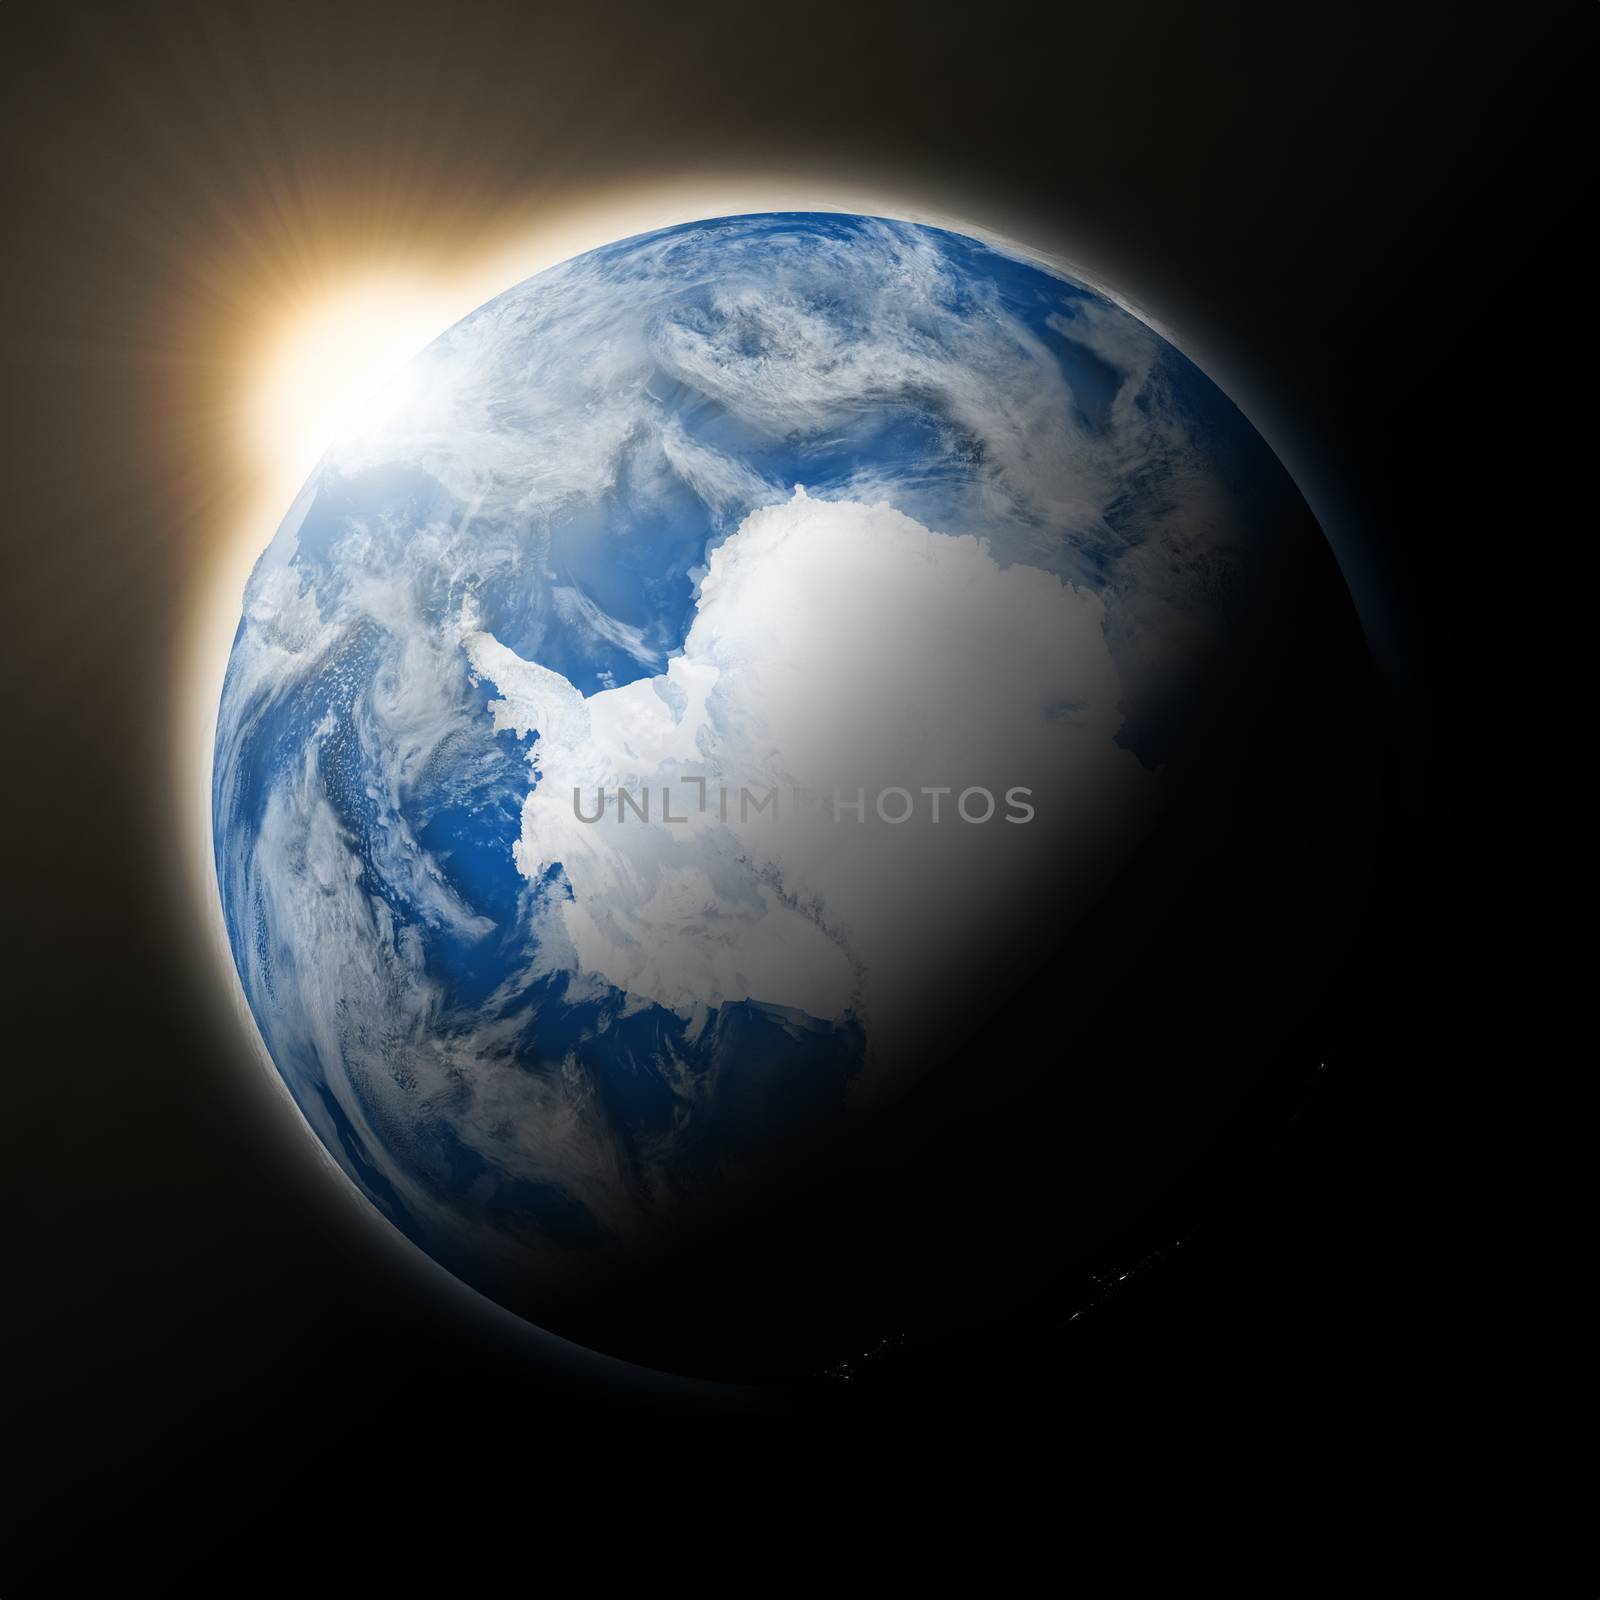 Sun over Antarctica on blue planet Earth isolated on black background. Highly detailed planet surface. Elements of this image furnished by NASA.